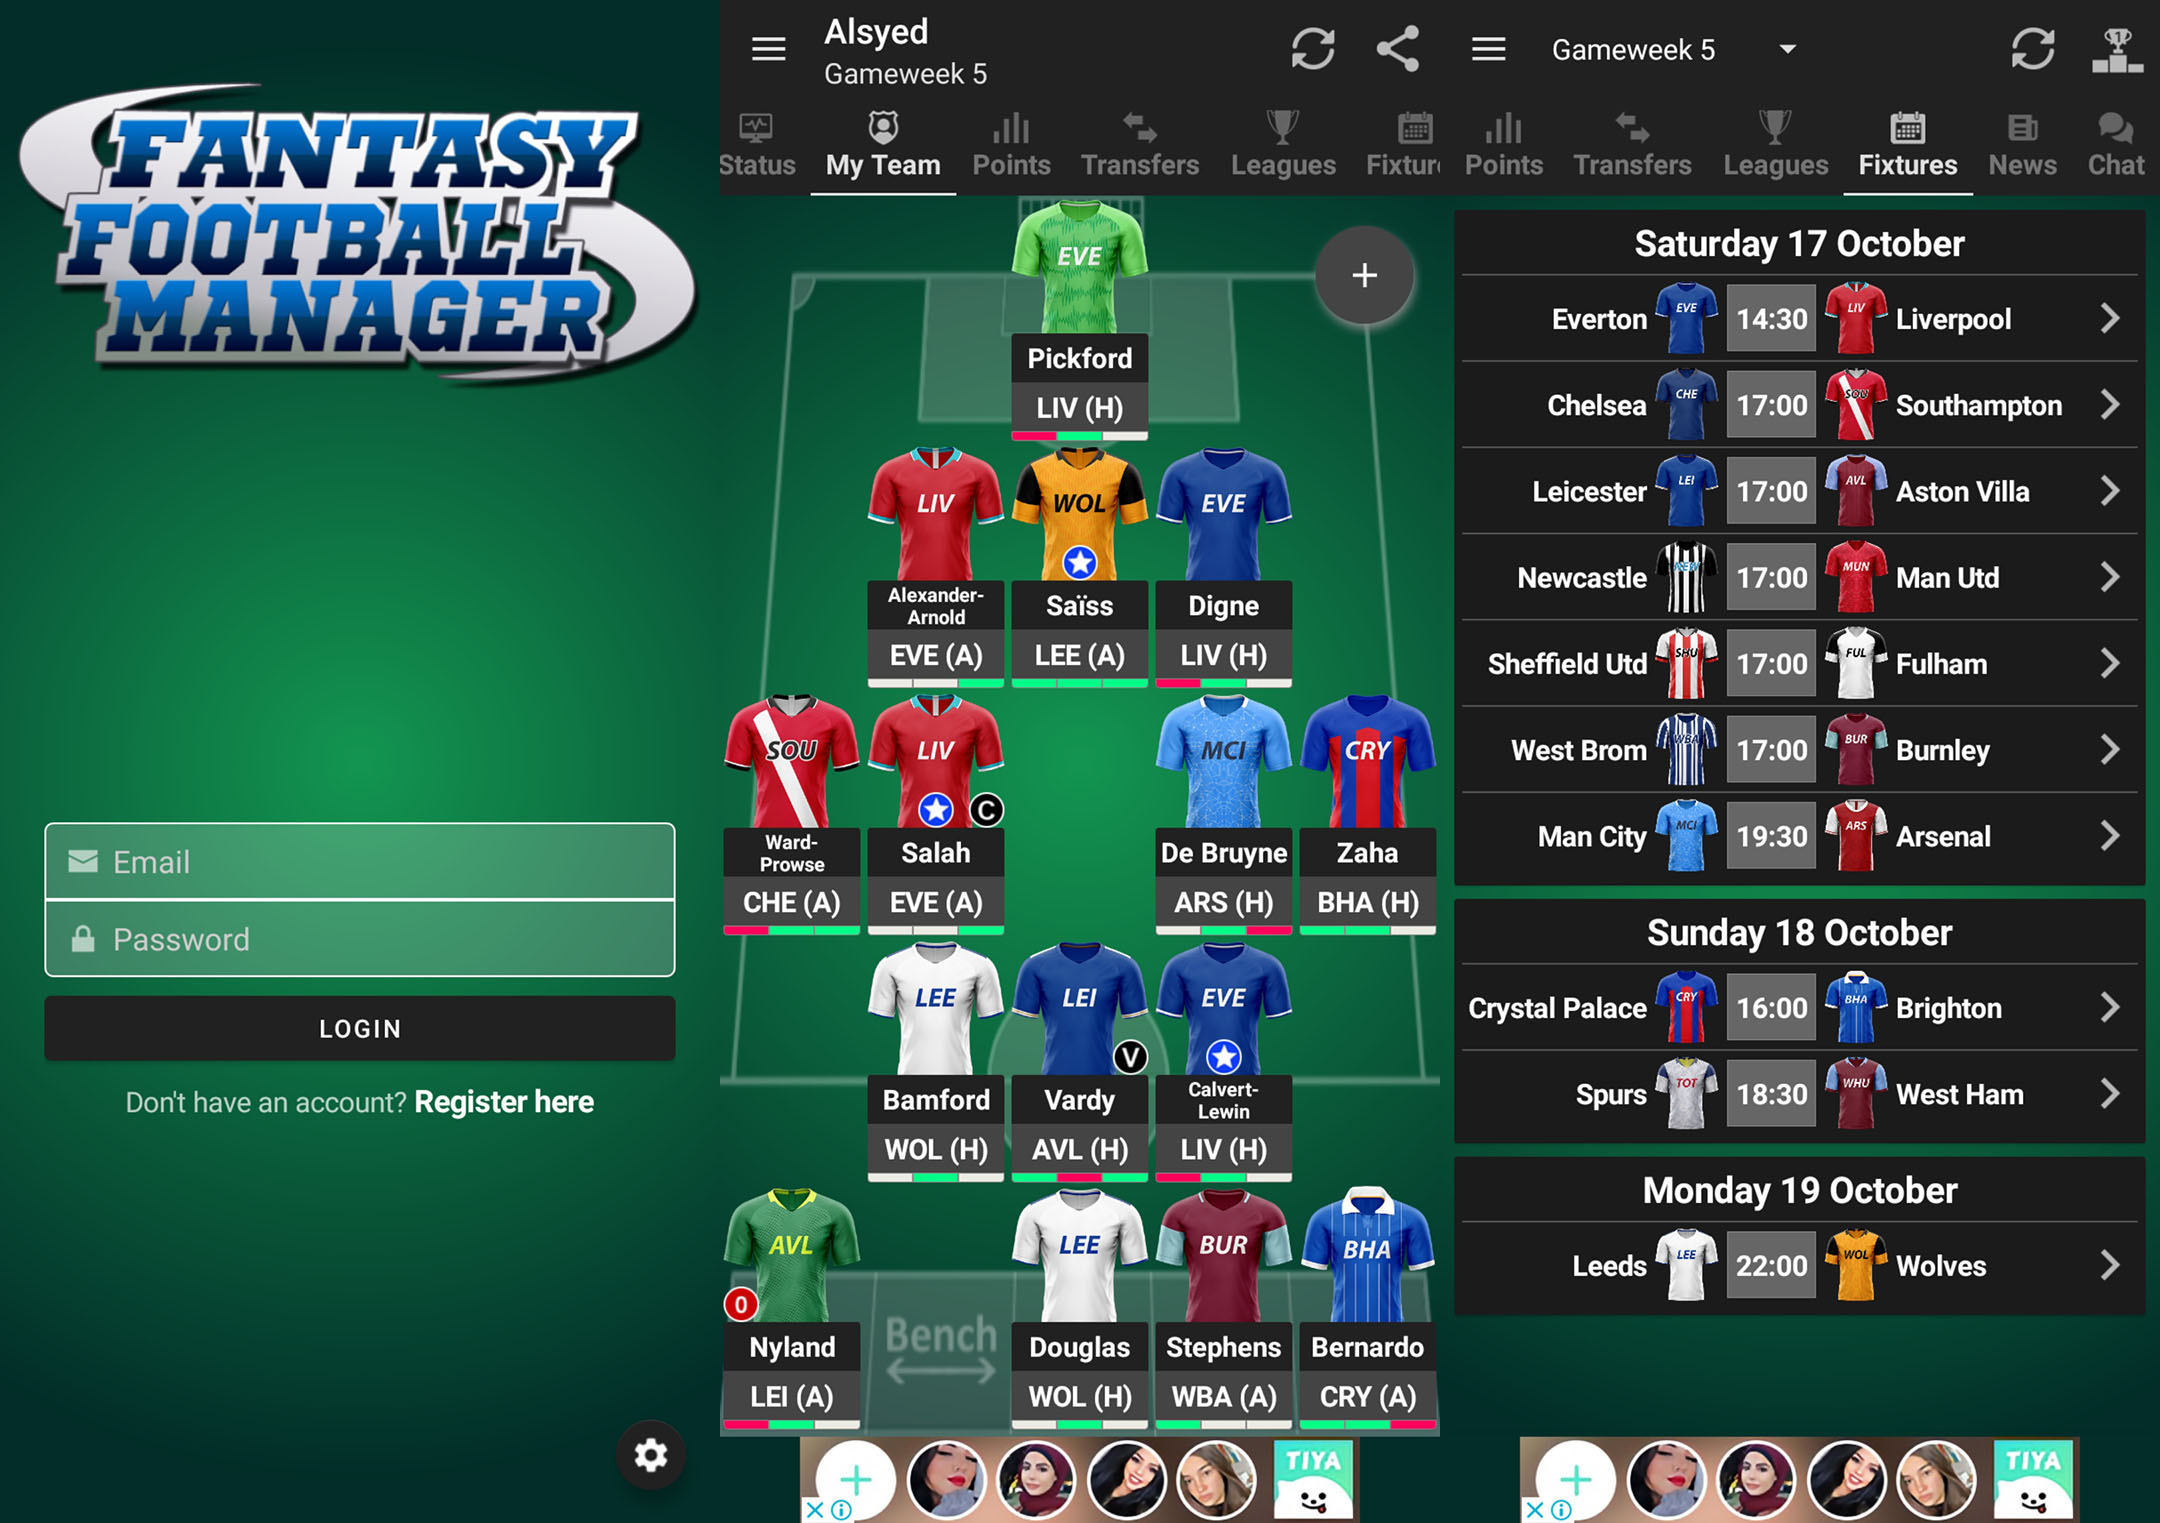 Fantasy Football Manager for Premier League